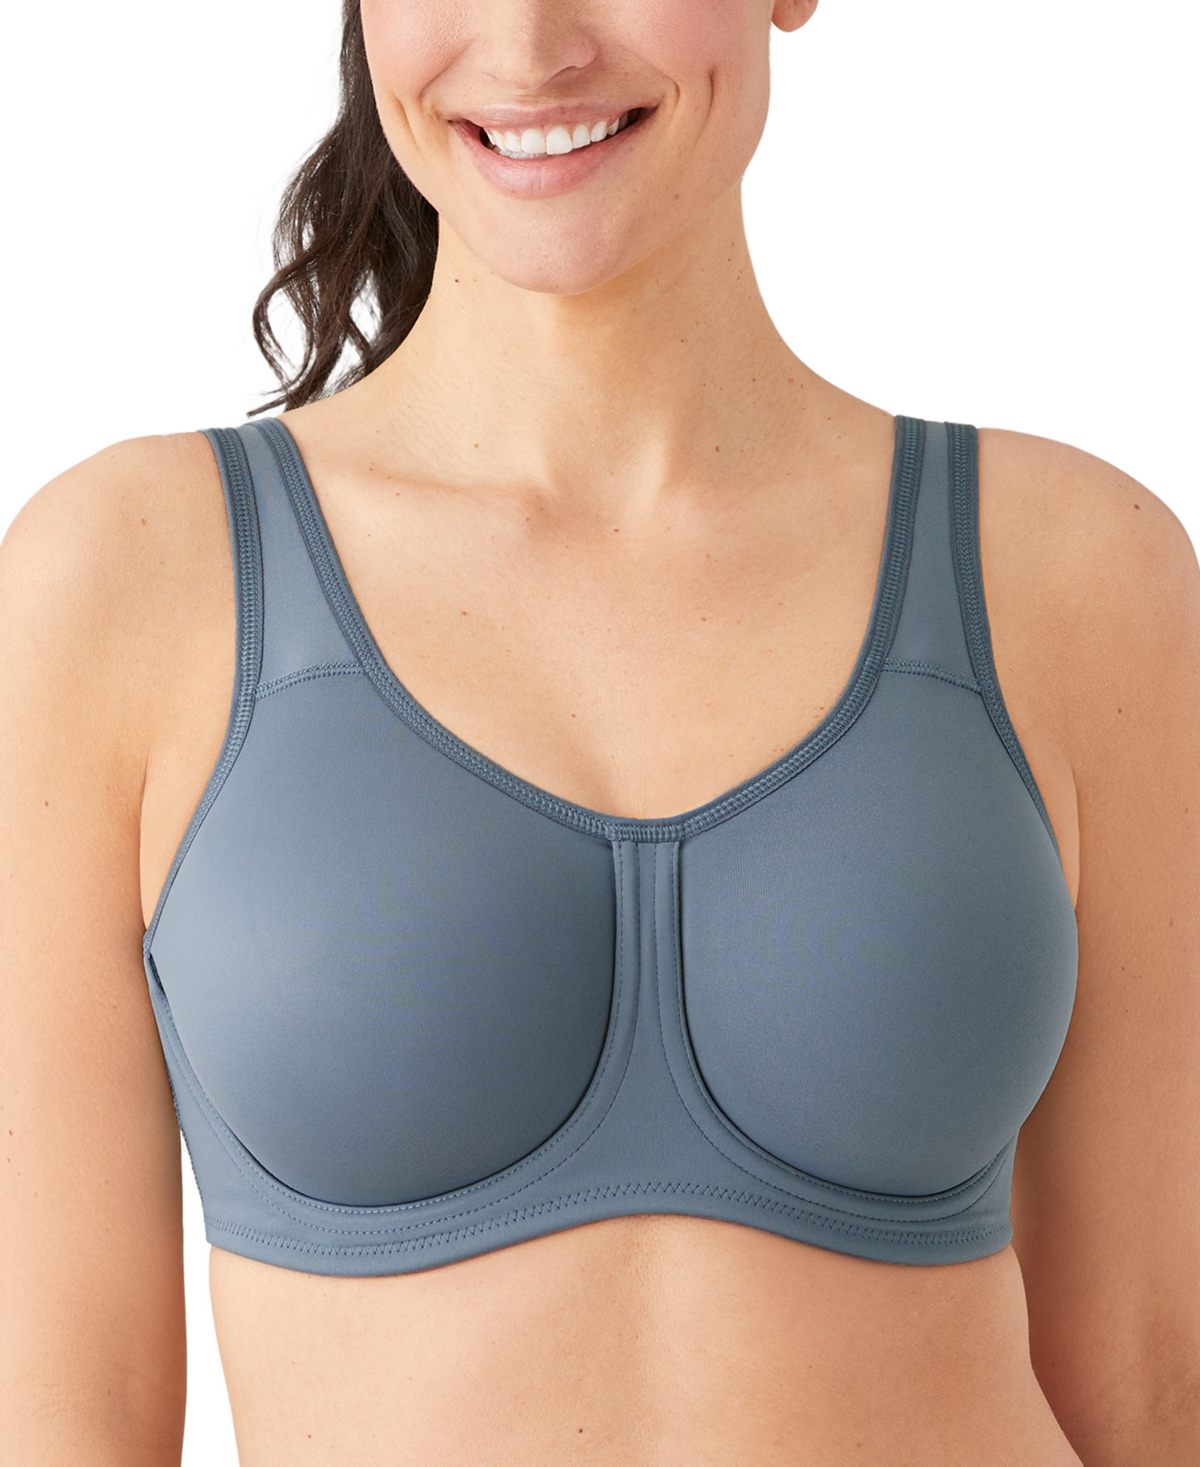 WACOAL SPORT HIGH-IMPACT UNDERWIRE BRA 855170, UP TO I CUP